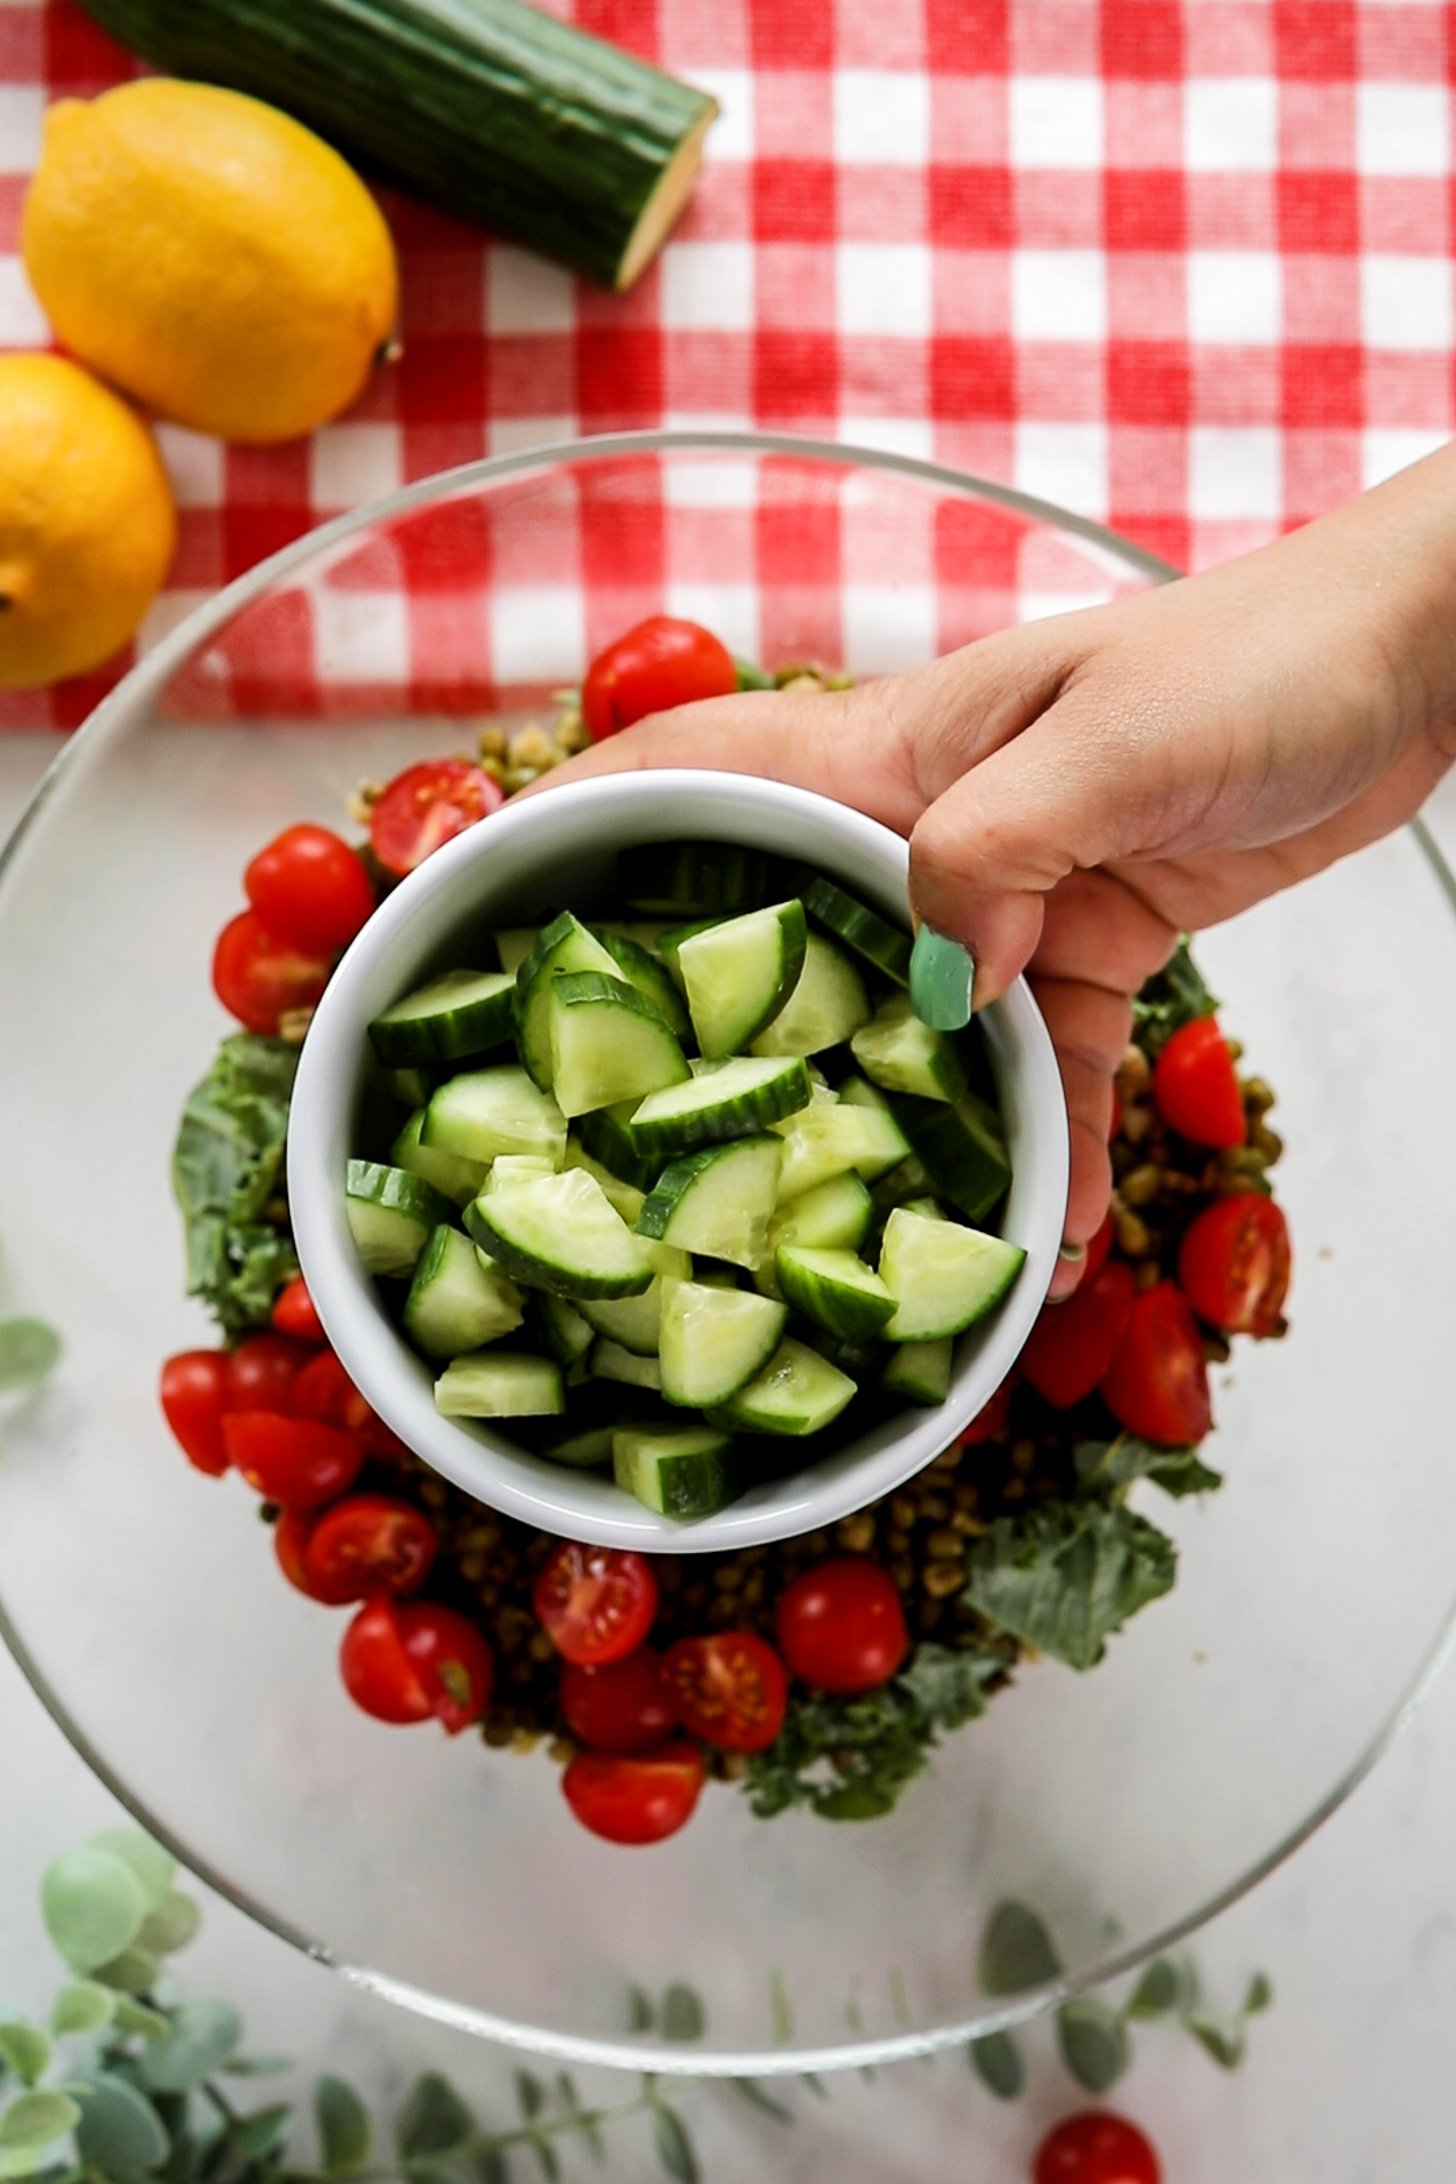 A hand holding a bowl of cucumber cubes over a salad bowl filled with cherry tomato halves and kale leaves.